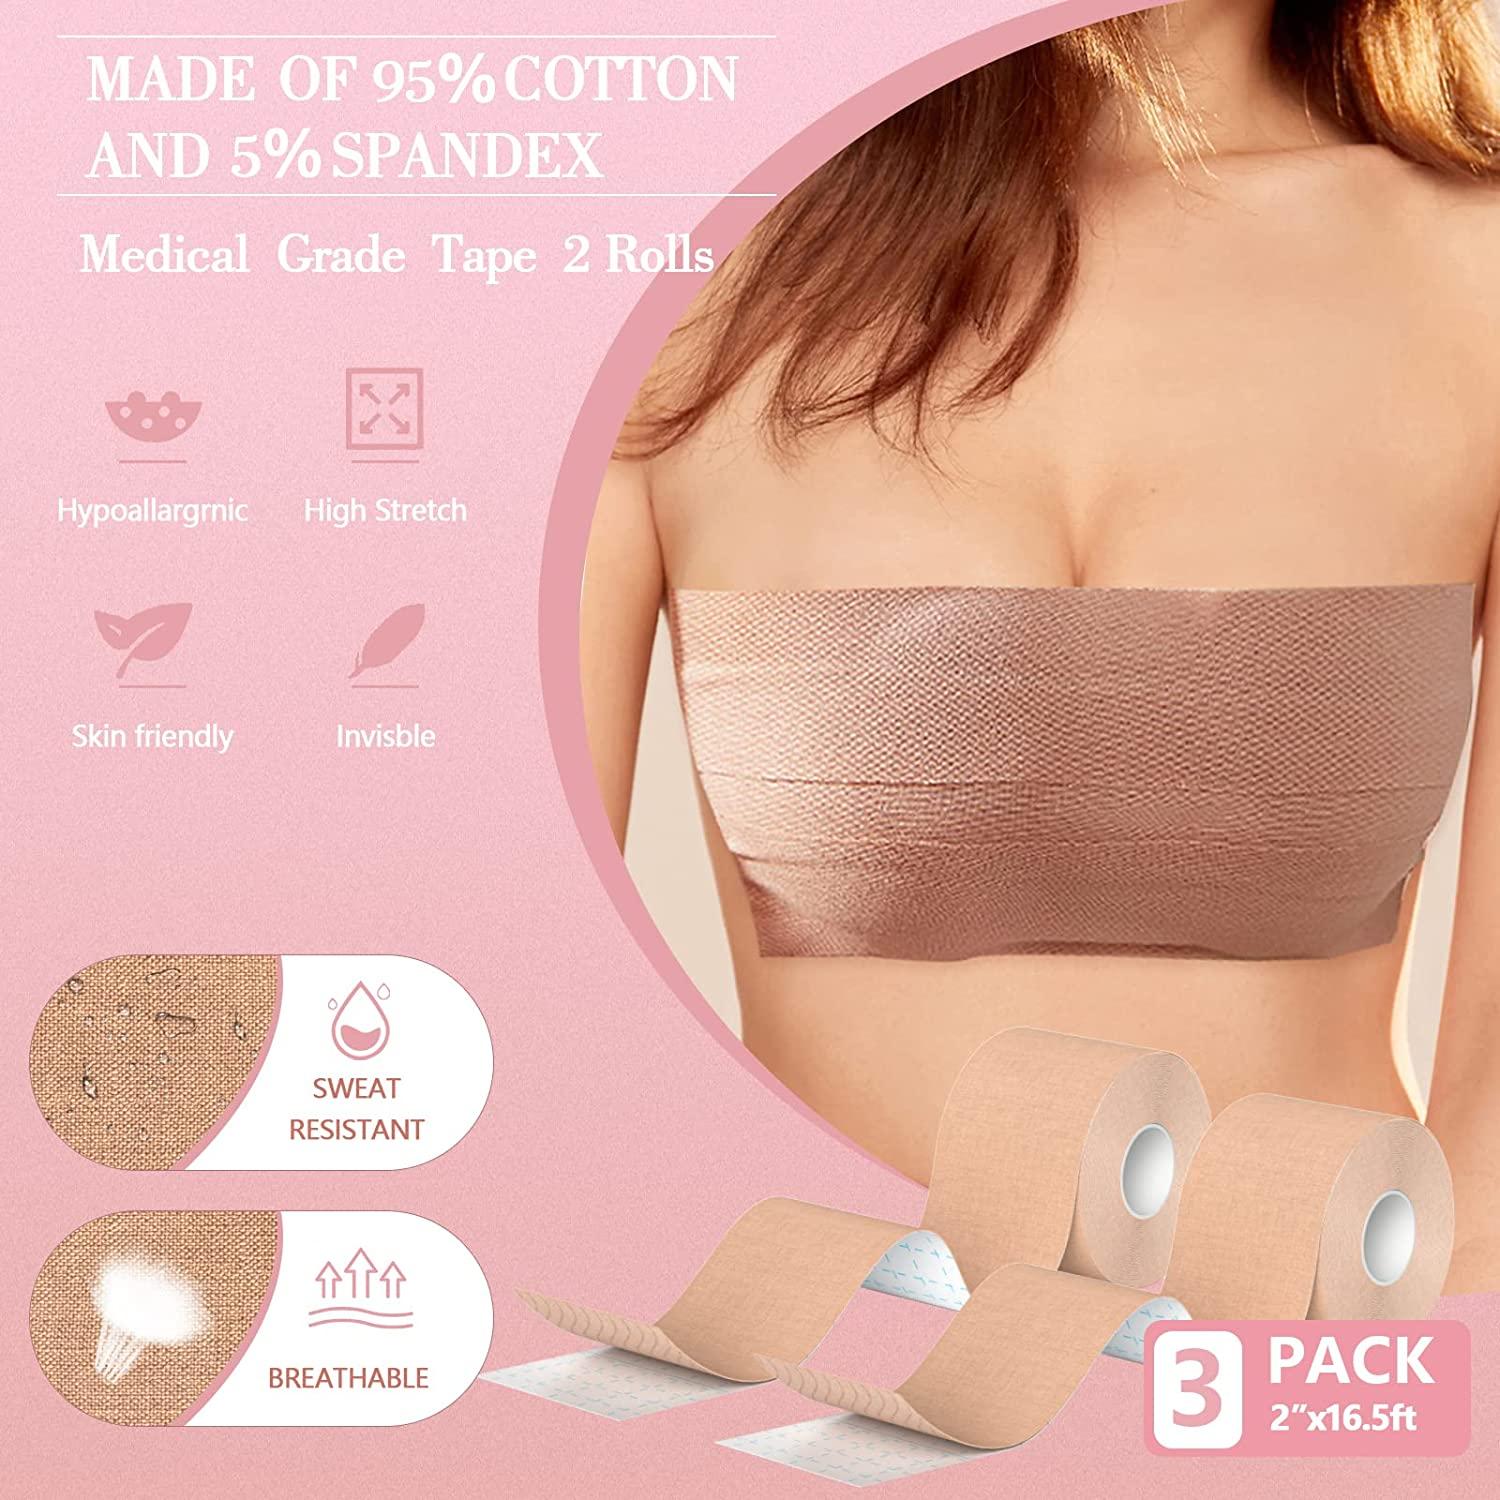 Buy Breast Lift Tape for Lift & Fashion, Bra Alternative of Breasts, Achieve Lift and Push up in All Fabric, Clothing, Dress Types